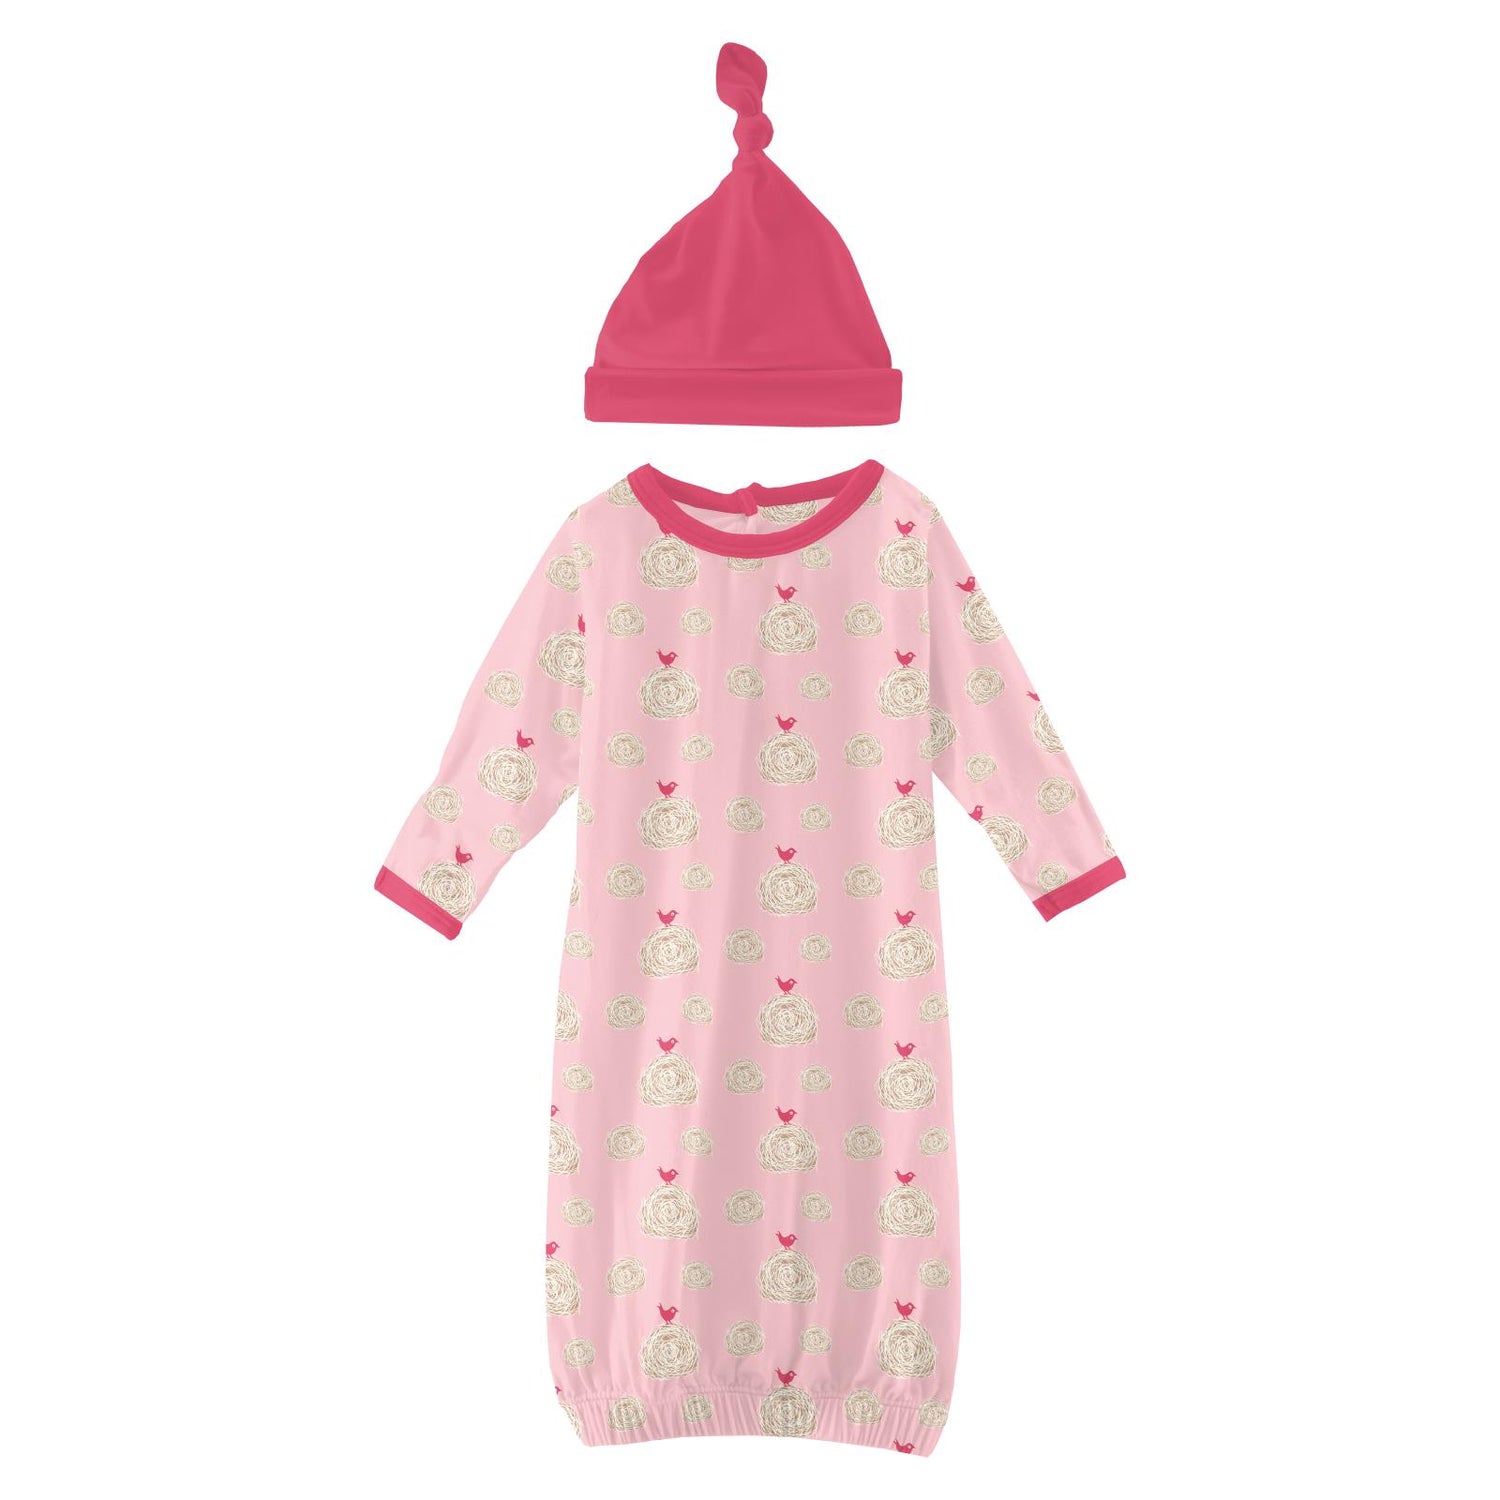 Print Layette Gown & Single Knot Hat Set in Lotus Hay Bales